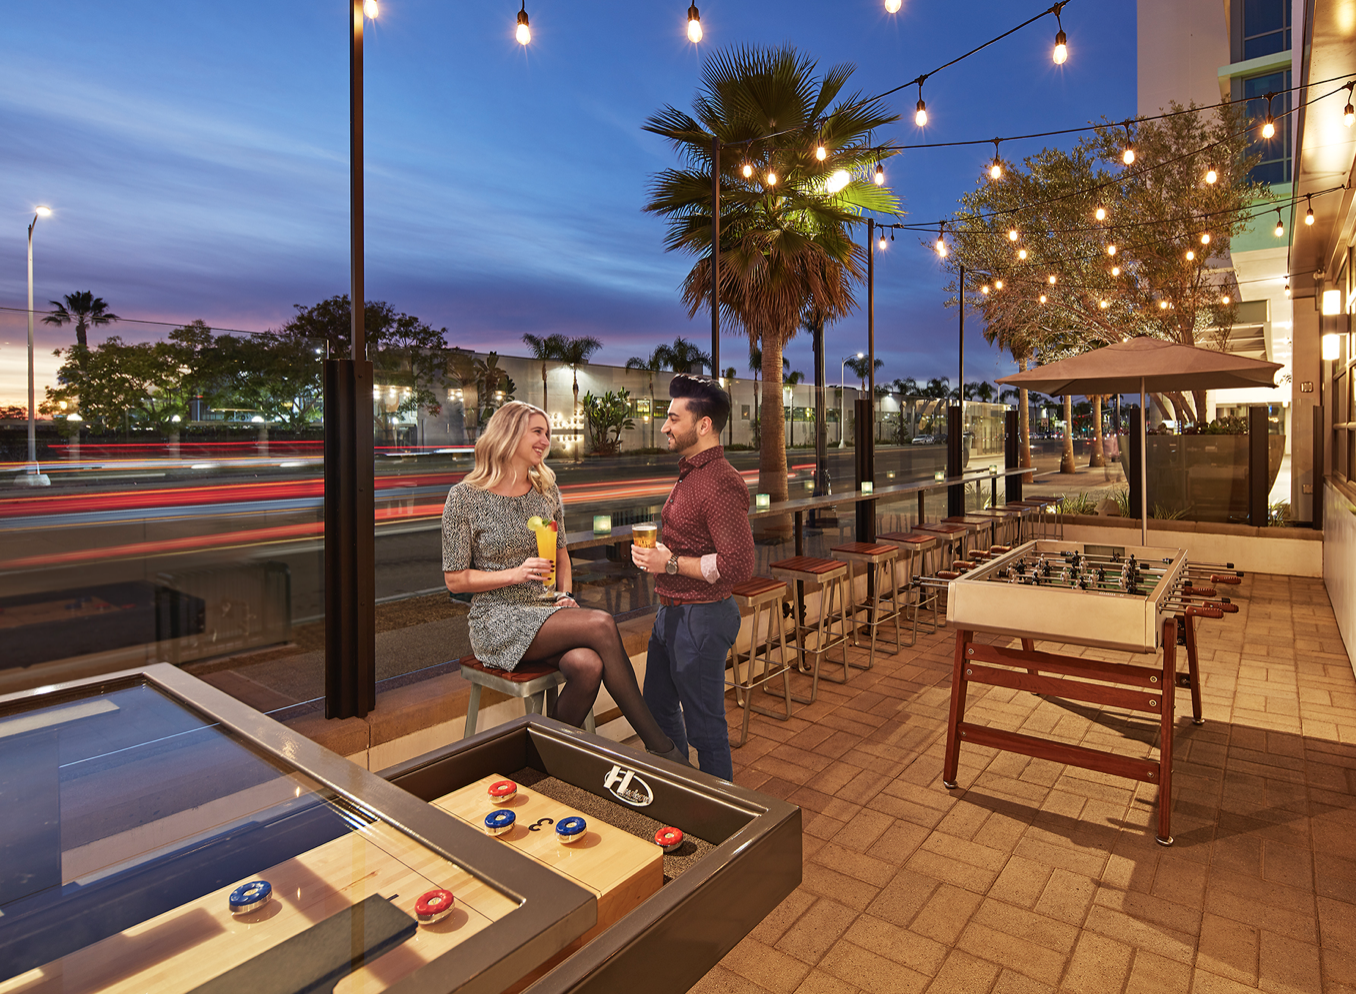 Sandiegoville Bayside Kitchen Bar Replaces Pacific Standard At Little Italy S Hilton Bayside